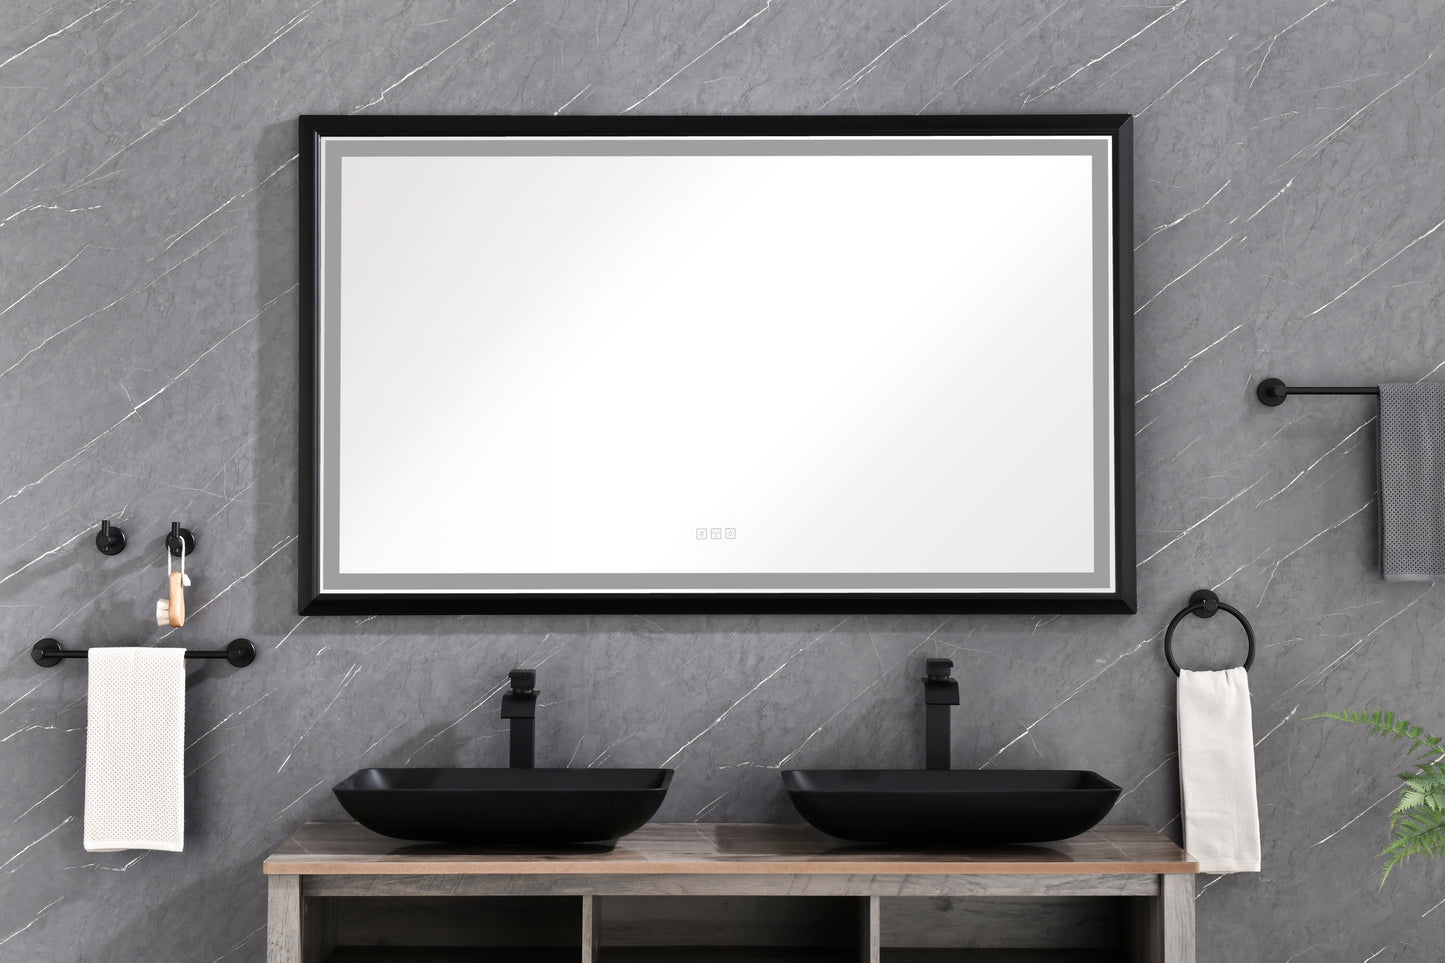 72in. W x 36in. H Oversized Rectangular Black Framed LED Mirror Anti-Fog Dimmable Wall Mount Bathroom Vanity Mirror  HD Wall Mirror Kit For Gym And Dance Studio 36X 72Inches With Safety Ba